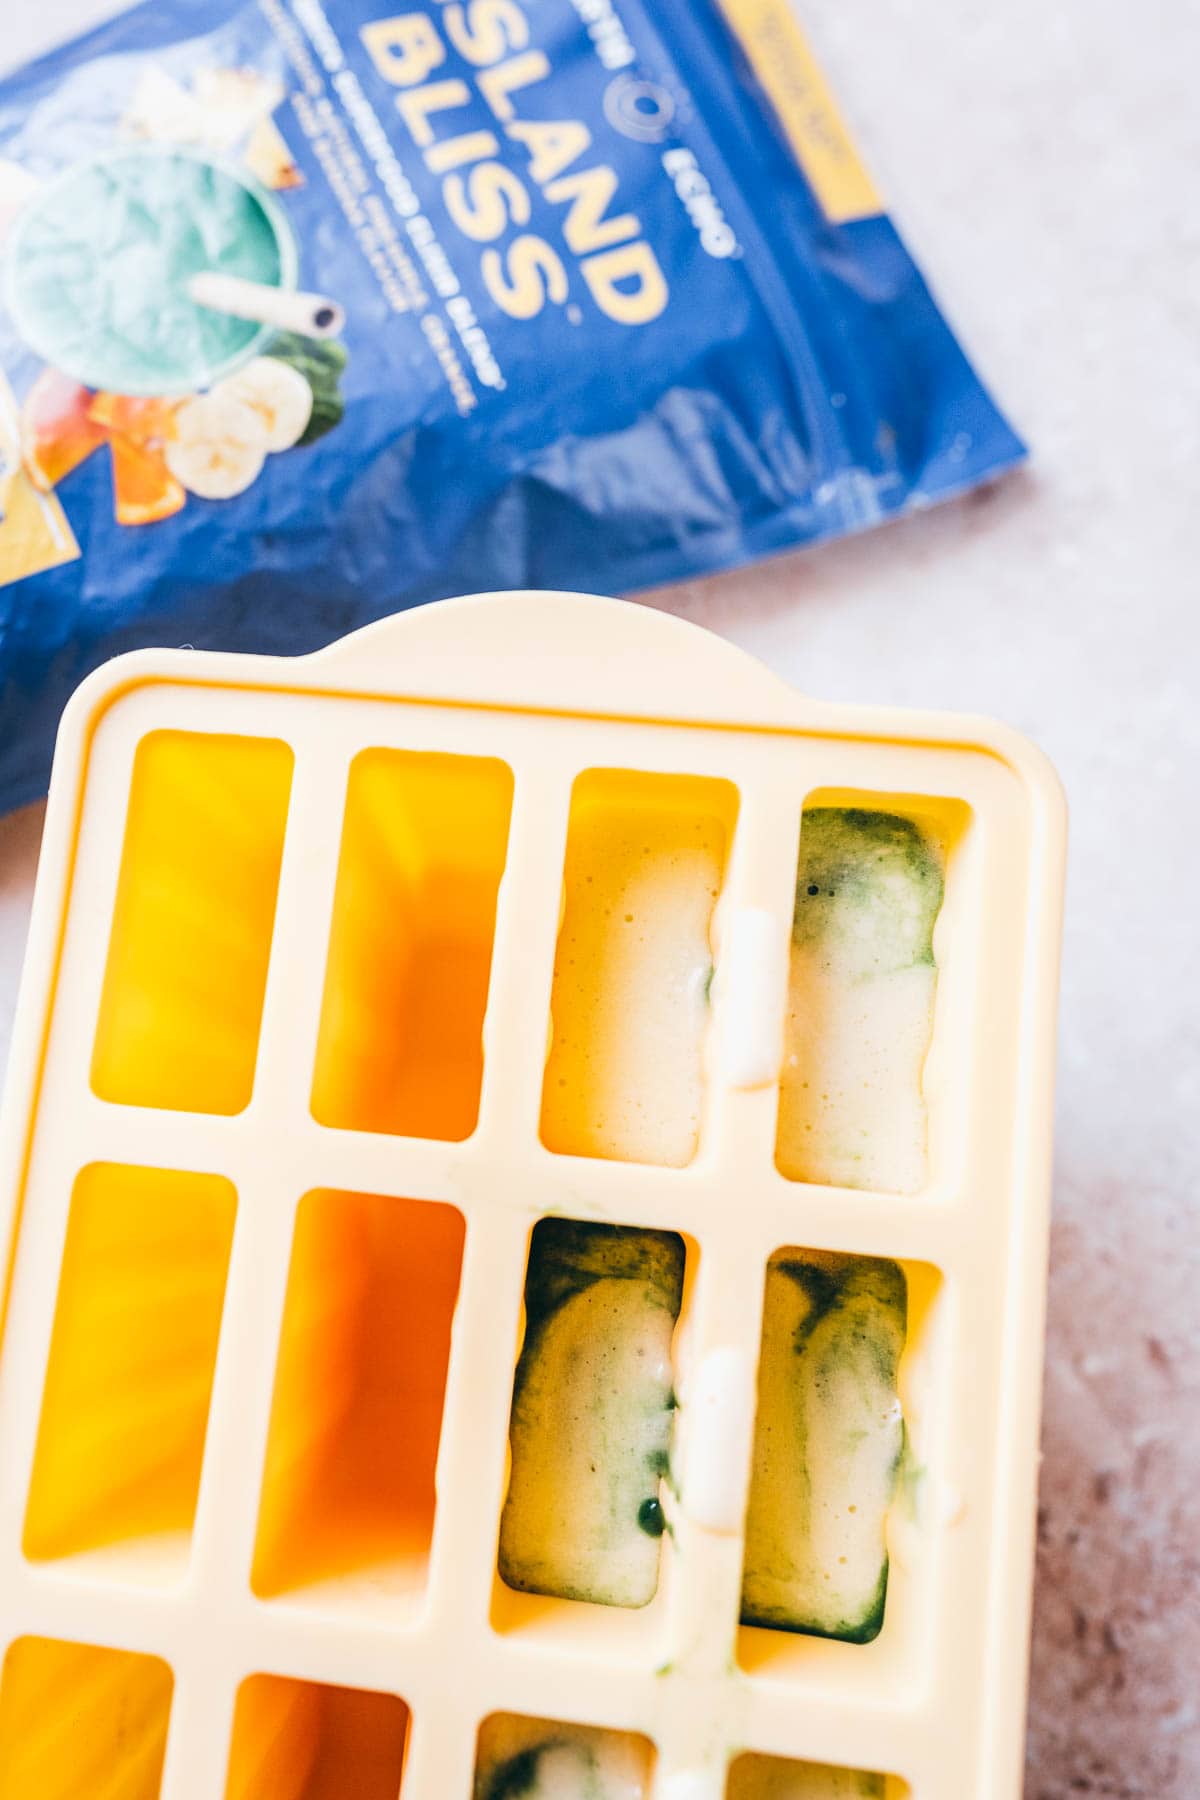 A popsicle mold filled with homemade blended popsicle ingredients.